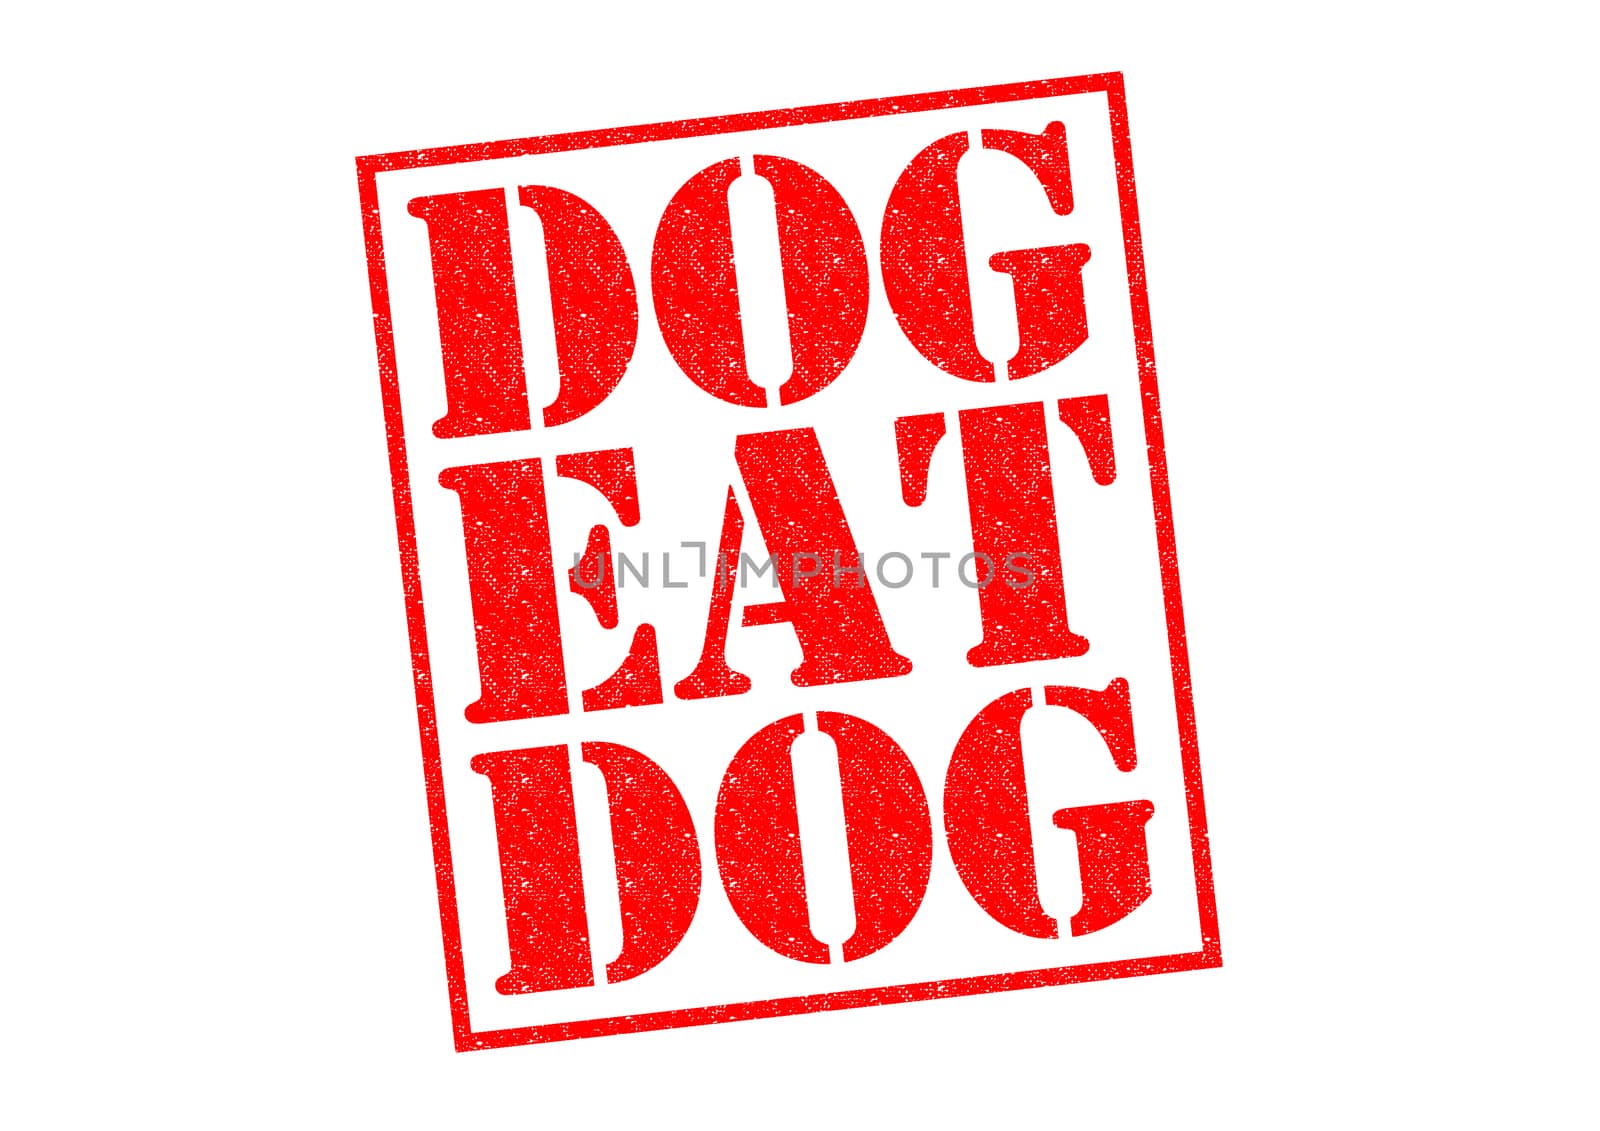 DOG EAT DOG red Rubber Stamp over a white background.